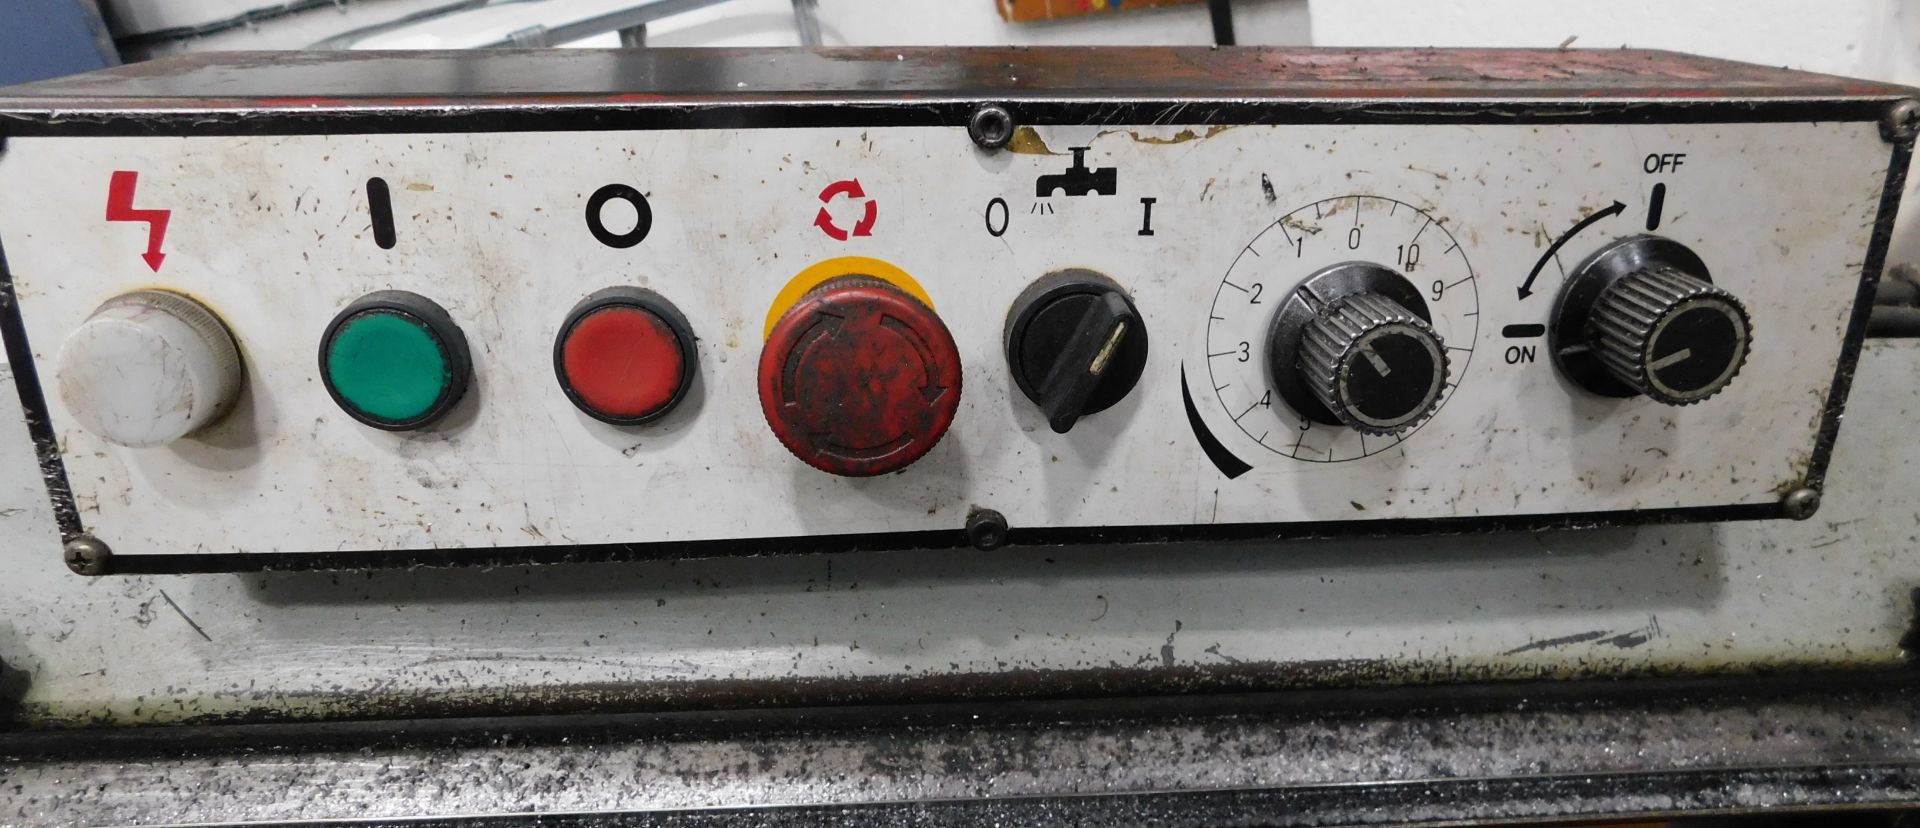 XYZ 260 10in Metal Horizontal Band Saw, Serial Number 00111220 (2000)  (Located North Manchester. - Image 9 of 10